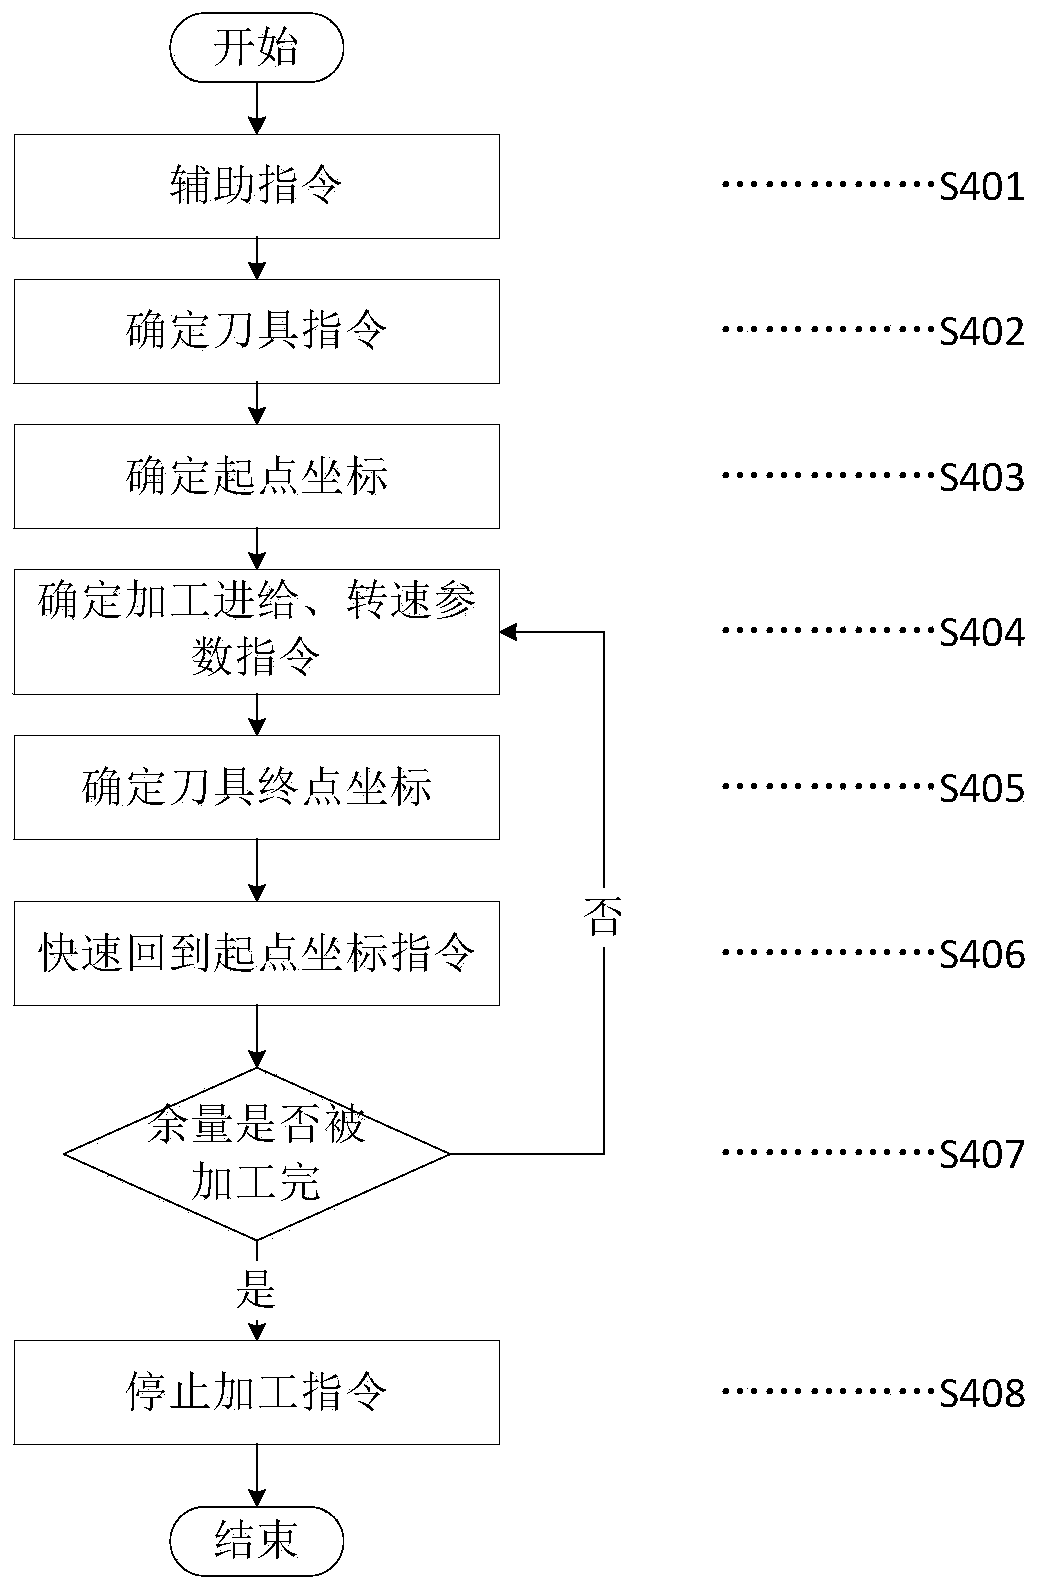 Machining process numerical control code standardized integration model and method